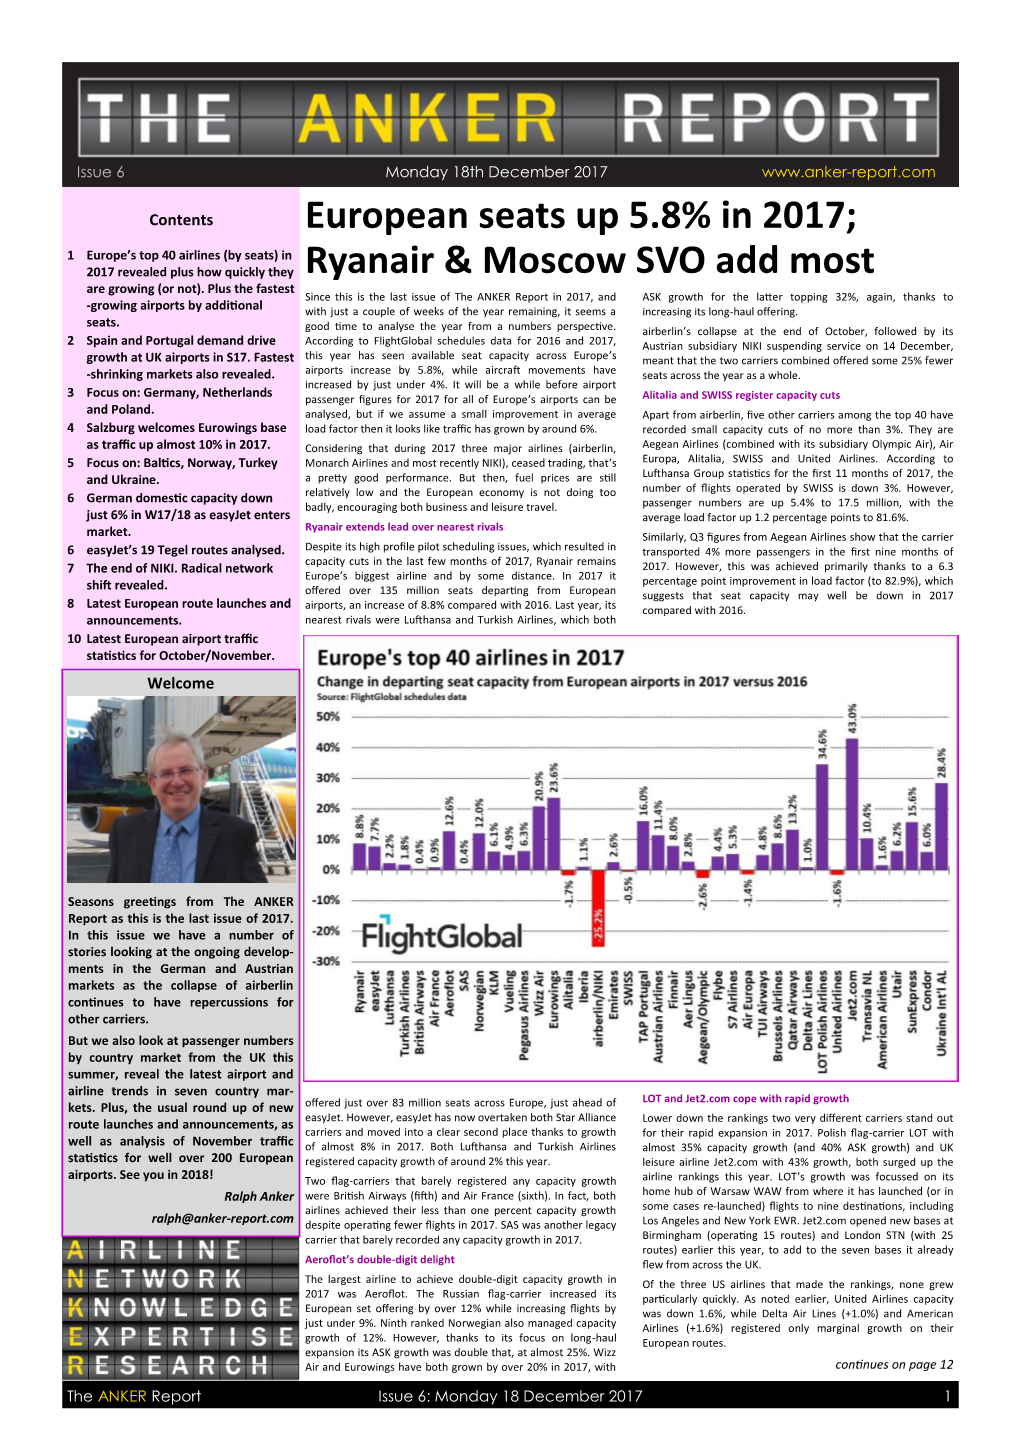 Ryanair & Moscow SVO Add Most